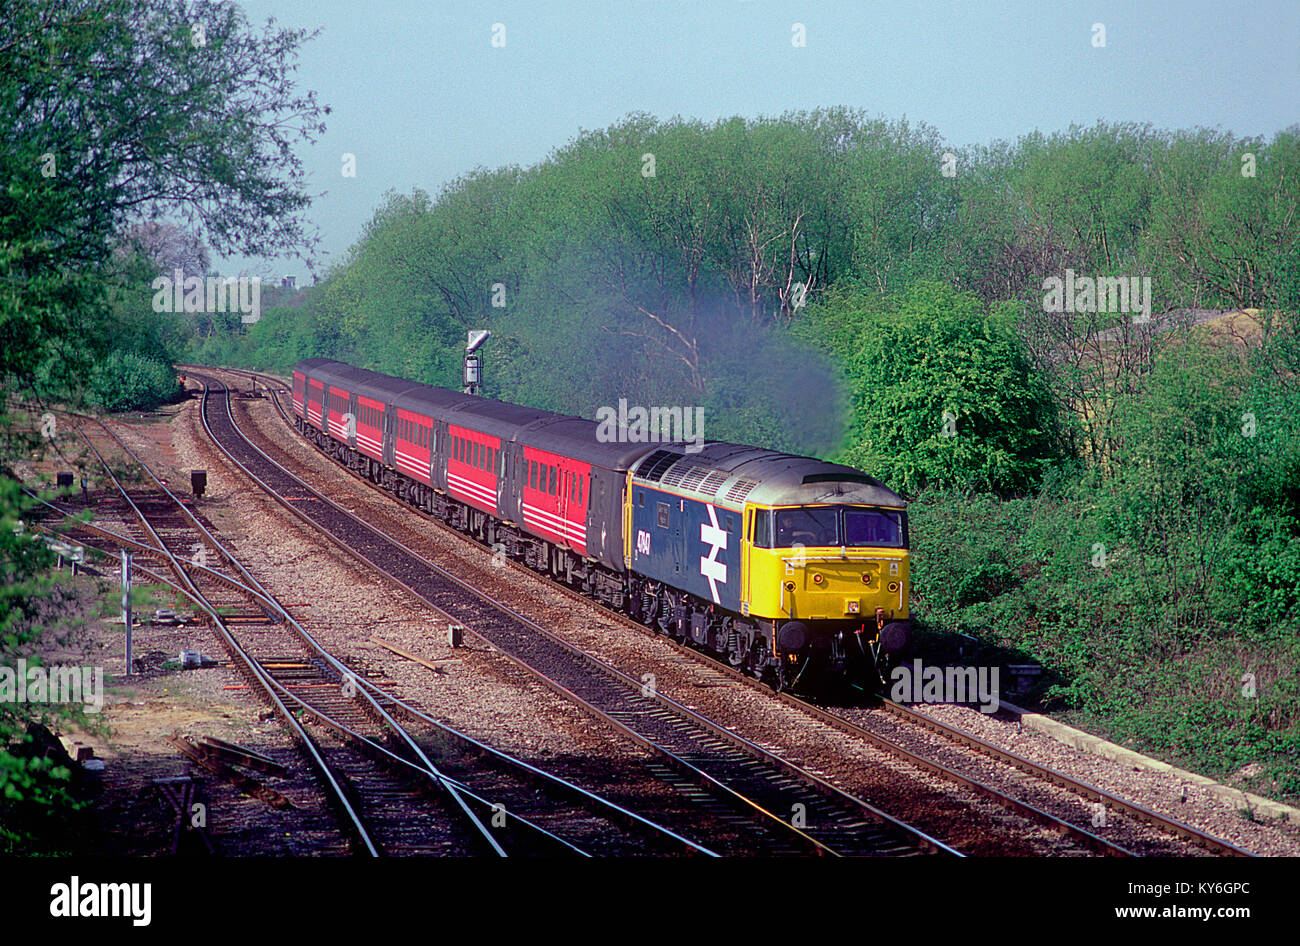 A class 47 diesel locomotive number 47847 working a Virgin Cross Country service passing Hinksy Yard near Oxford. 23rd April 2002. Stock Photo